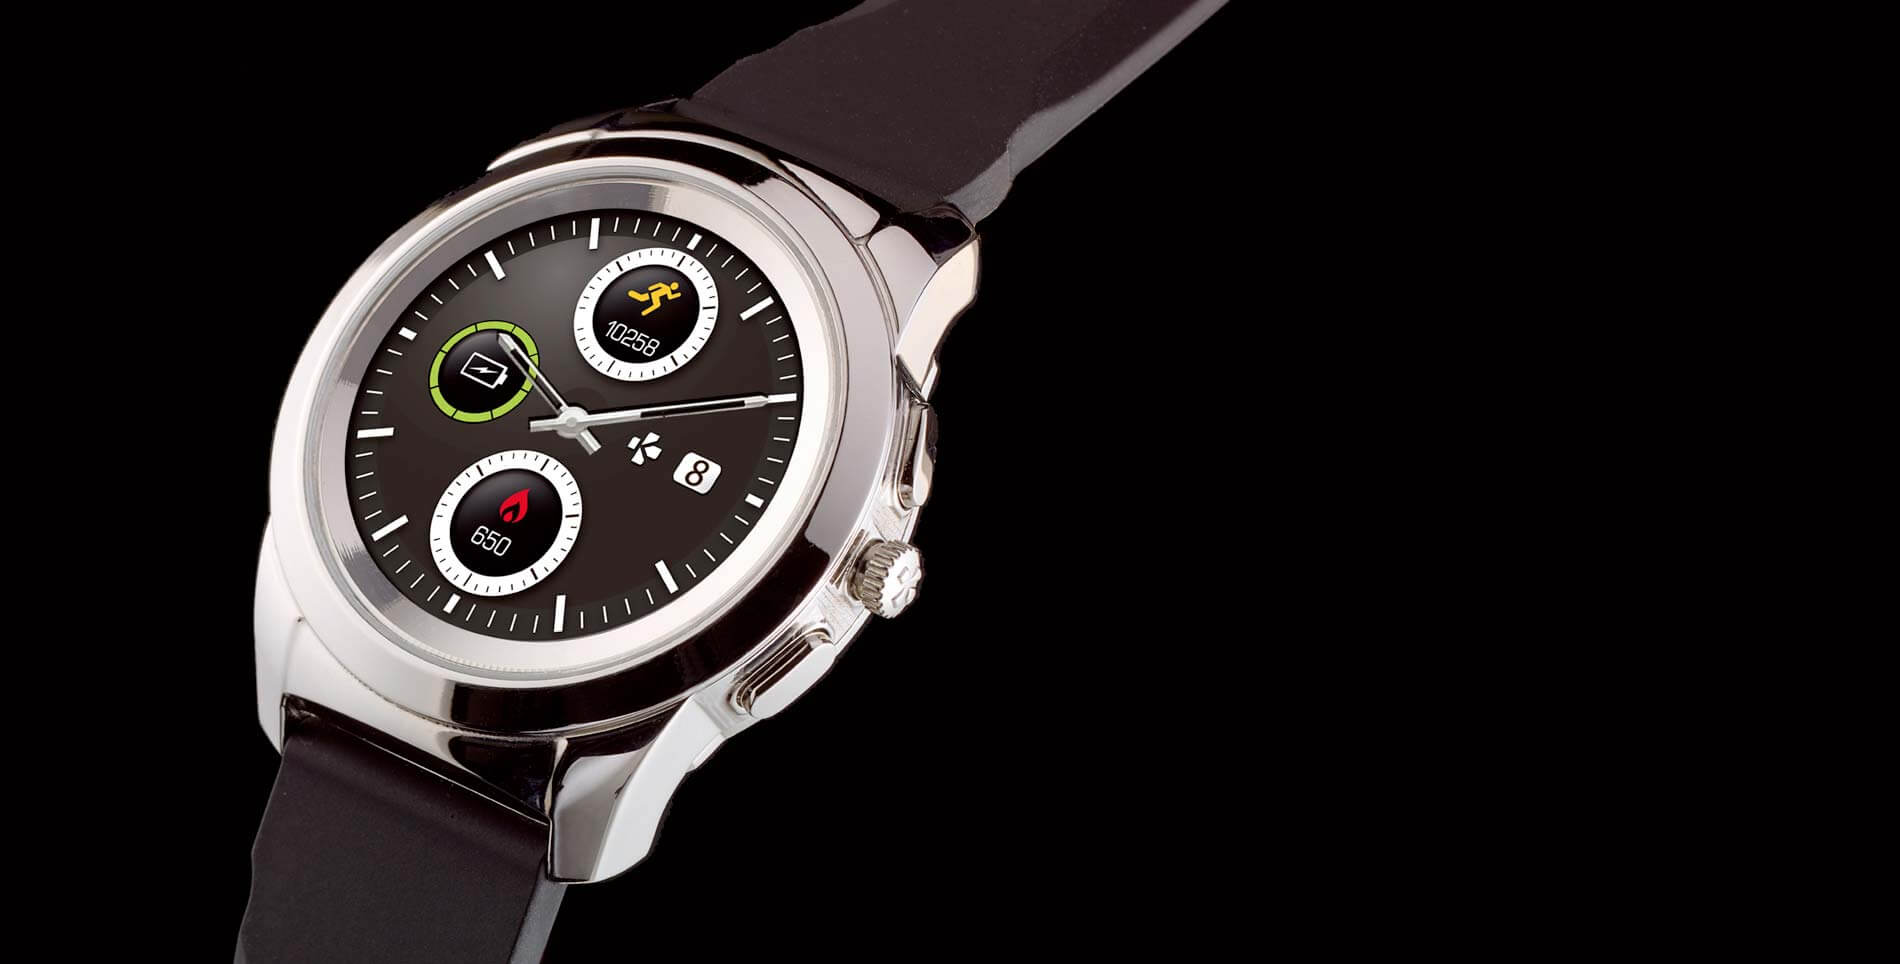 ZeTime Premium, a smartwatch with 30 days battery life without 